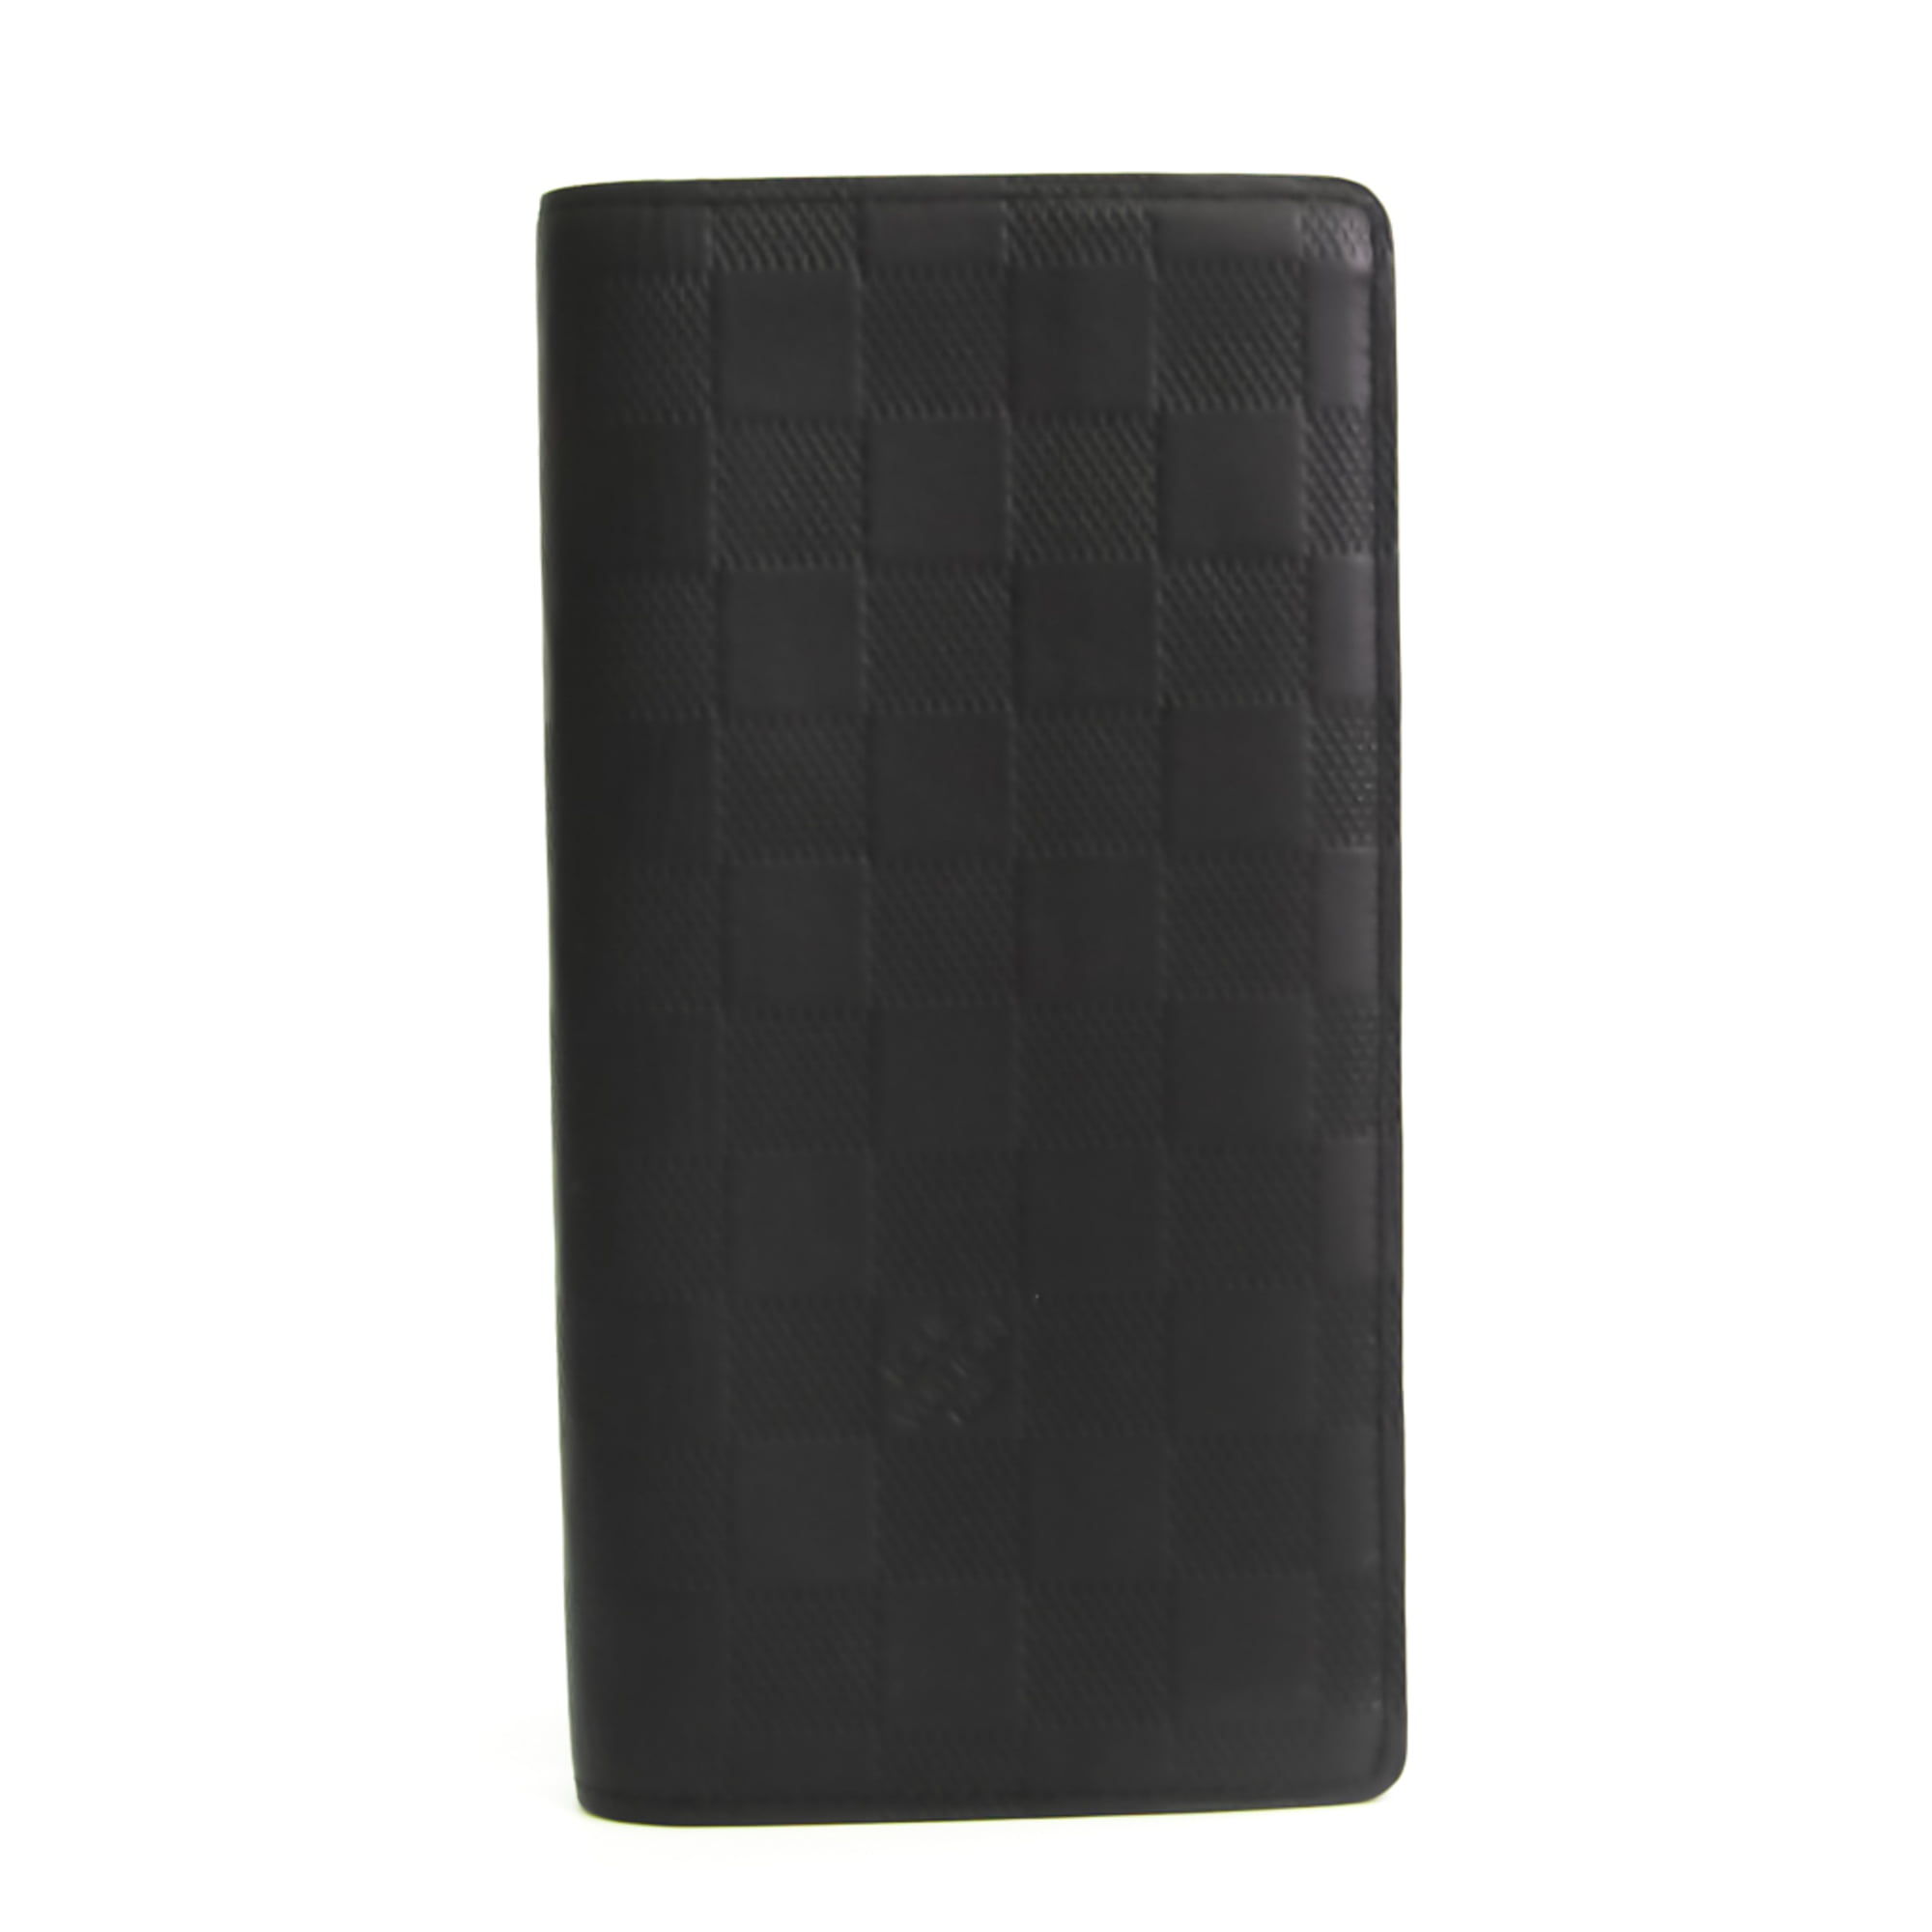 Brazza Wallet - Luxury Long Wallets - Wallets and Small Leather Goods, Men  N63010